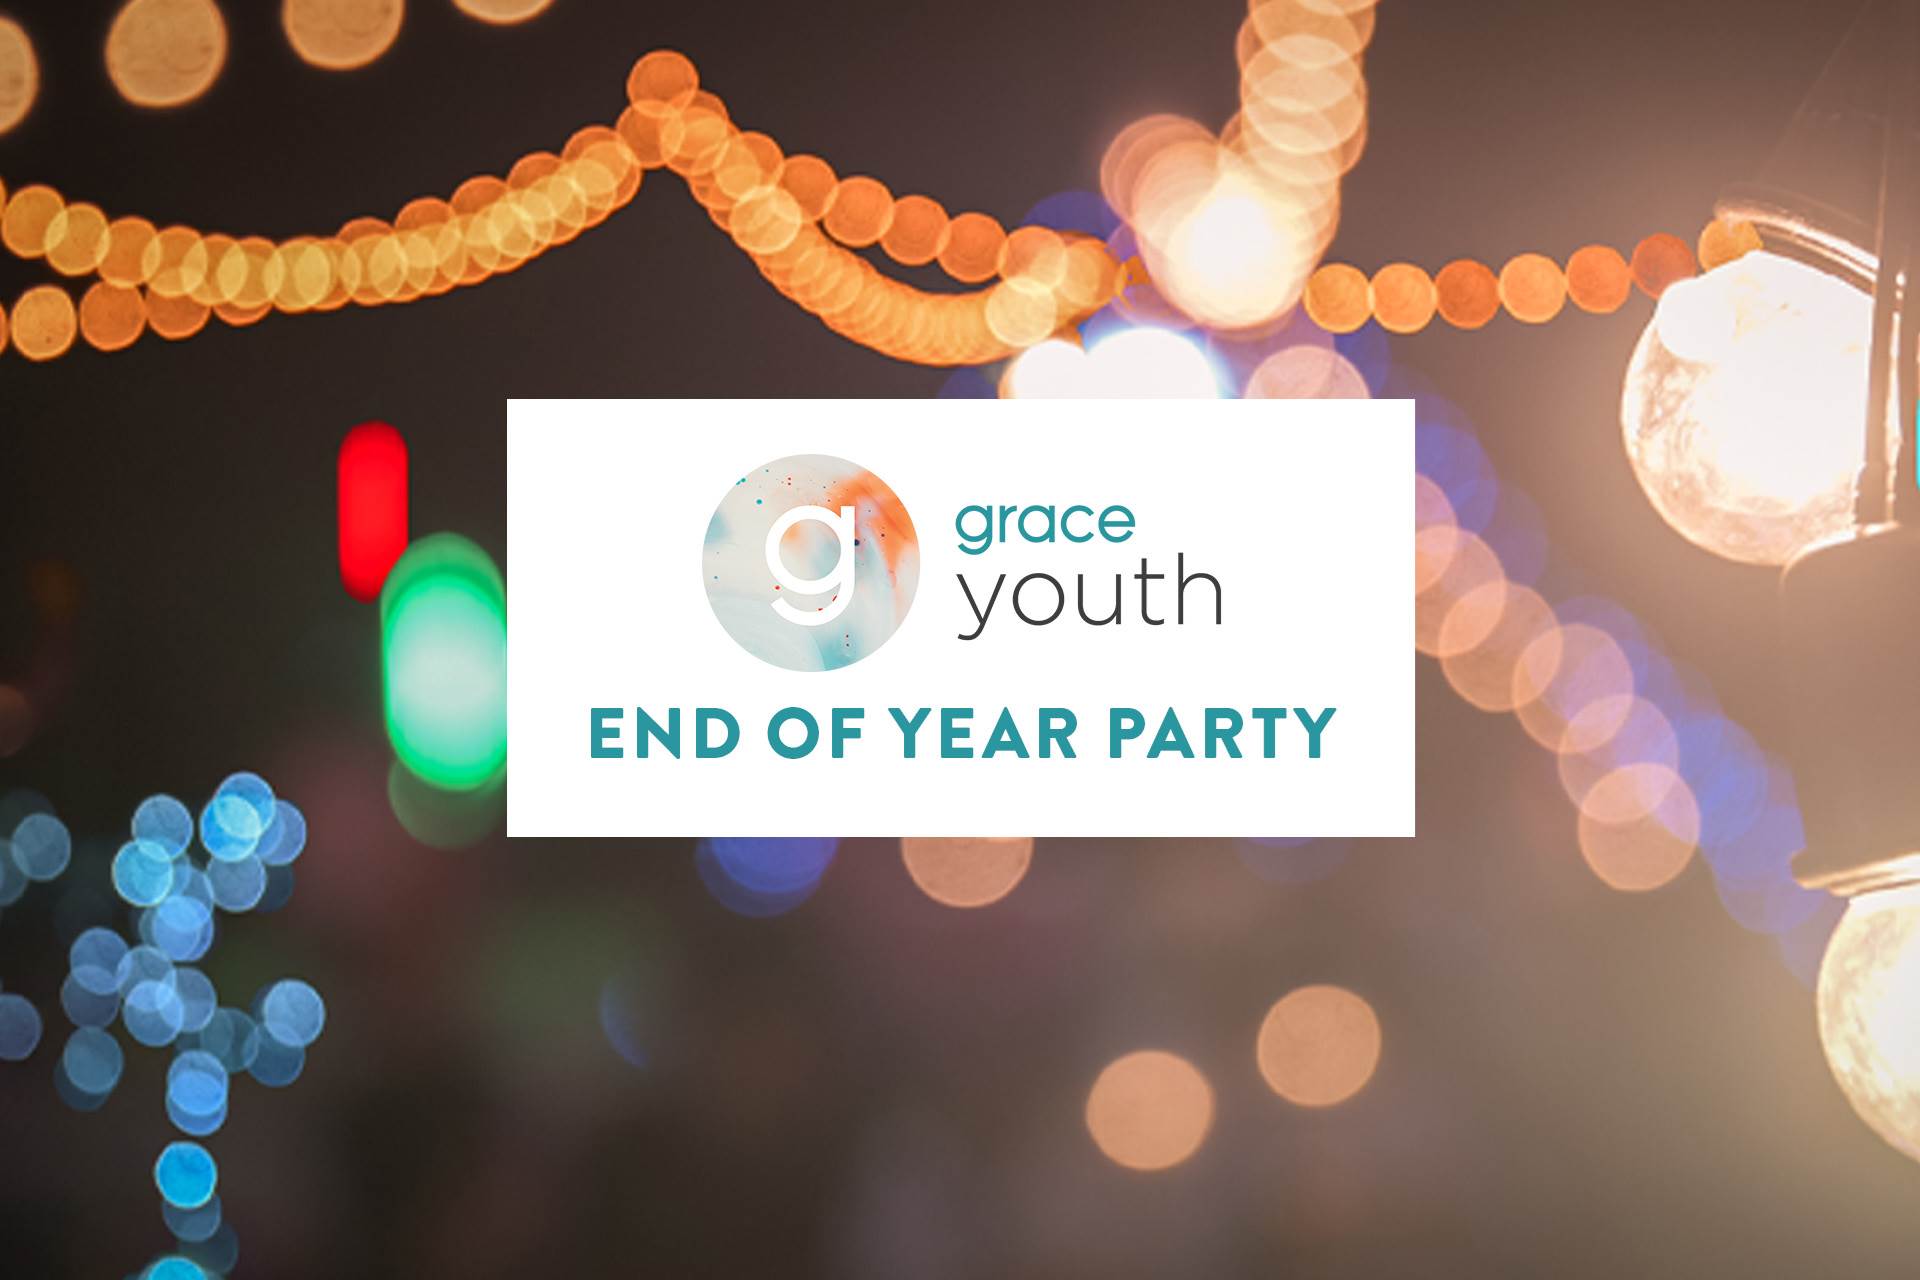 Link to Grace Youth End-of-Year Party detail page